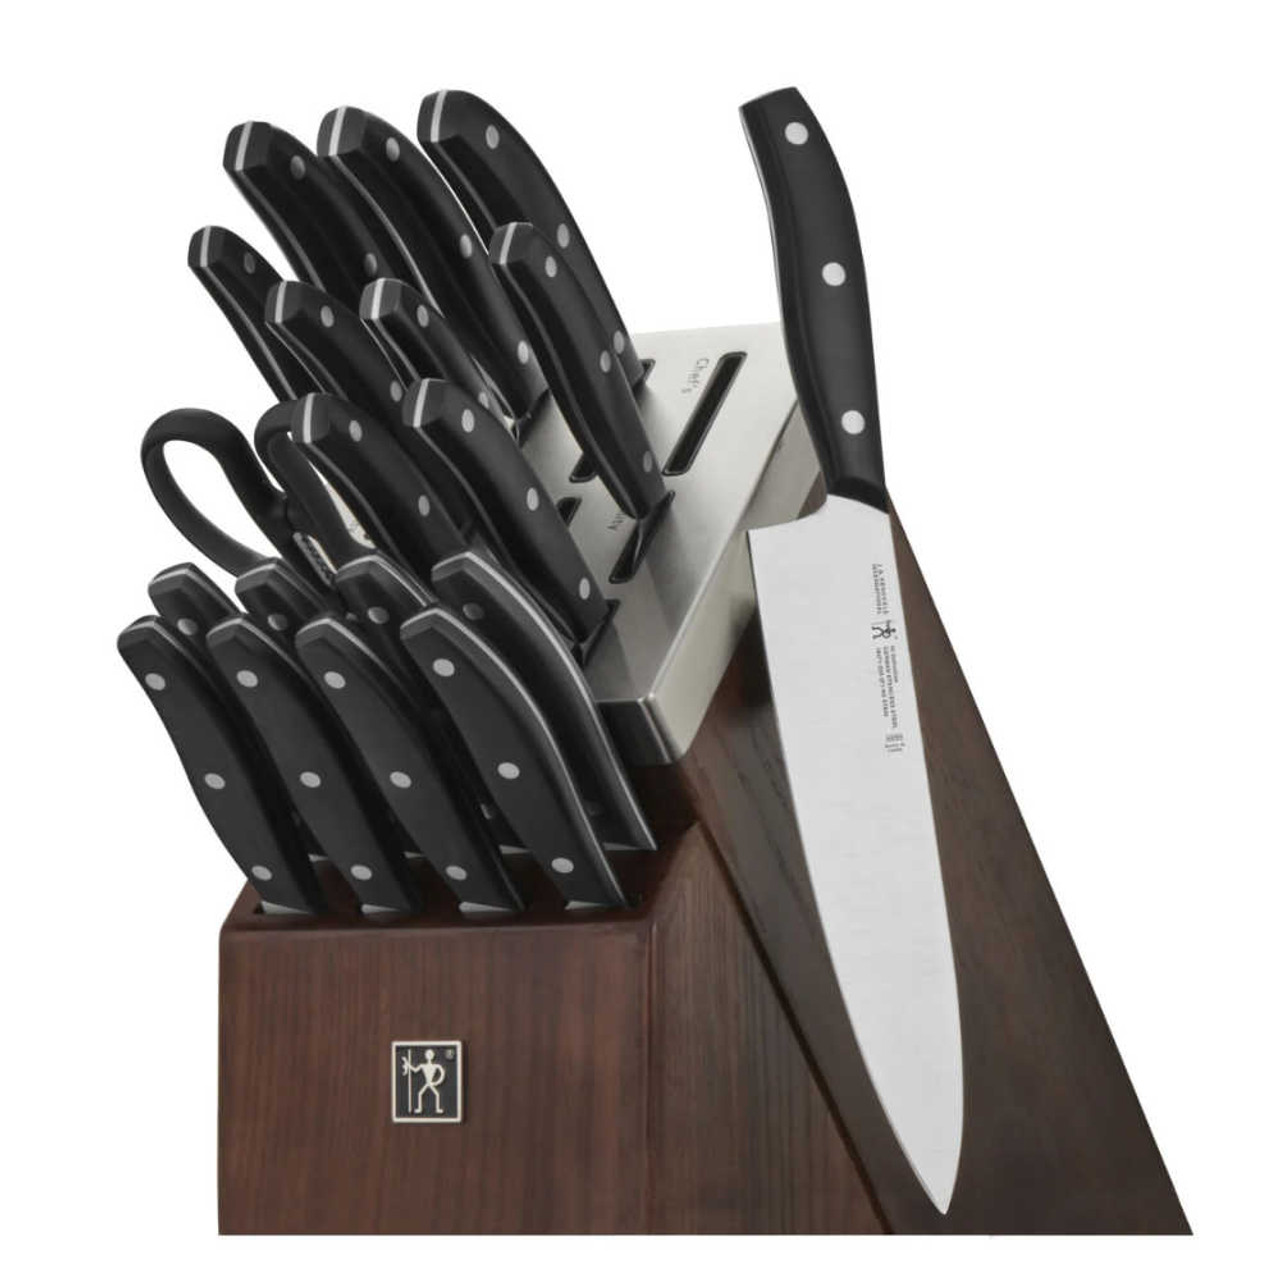 https://cdn11.bigcommerce.com/s-hccytny0od/images/stencil/1280x1280/products/5176/22362/Henckels_Definition_20-Piece_Self-Sharpening_Knife_Block_Set_1__88708.1668890989.jpg?c=2?imbypass=on